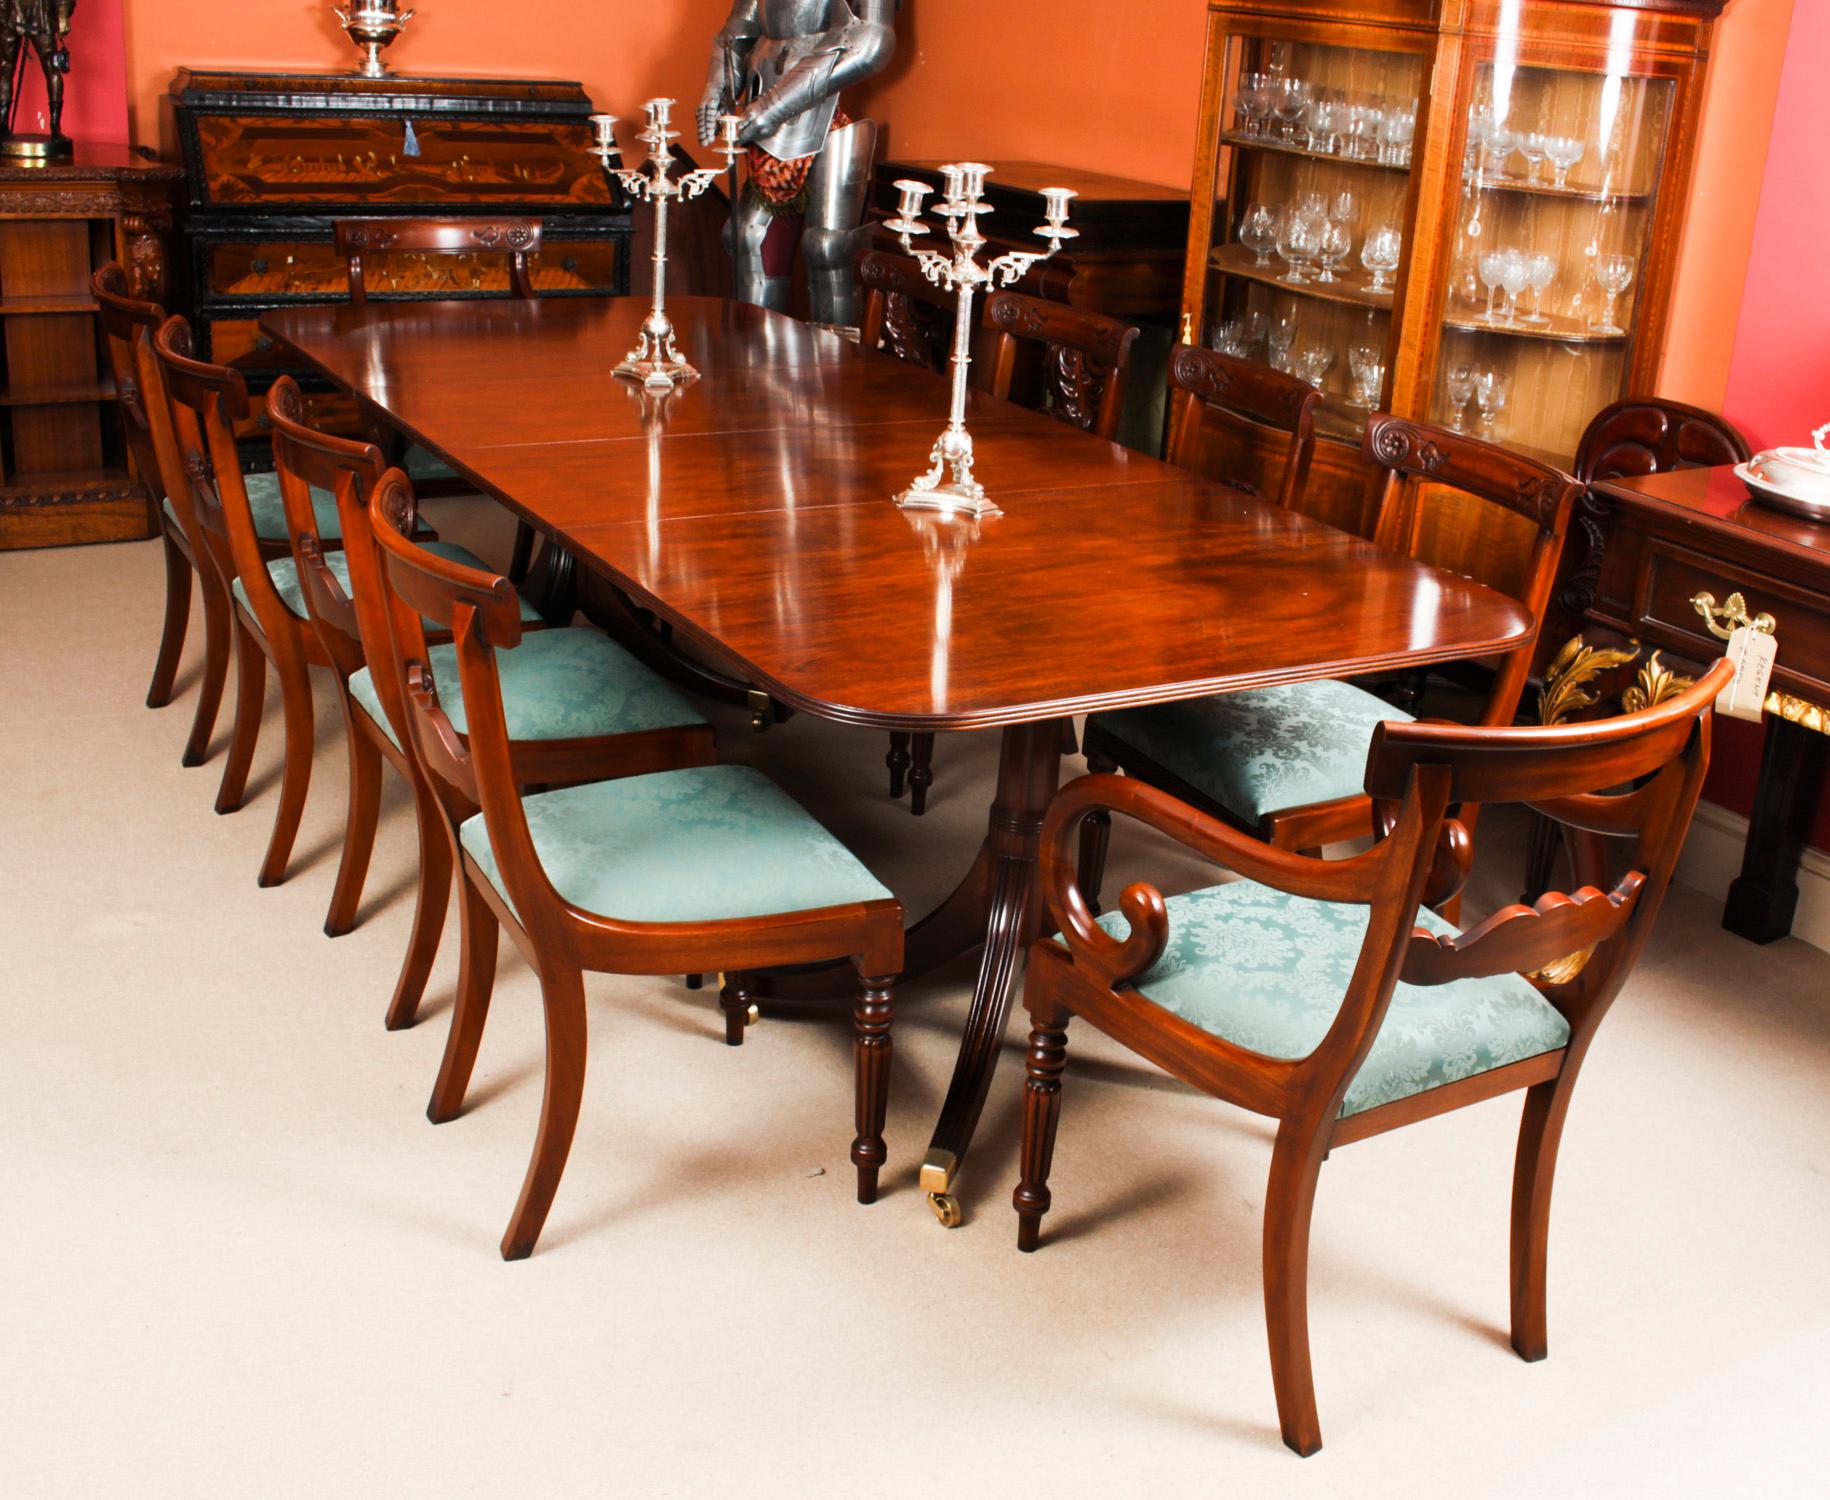 This is fabulous Vintage dining set comprising a Regency style dining table by William Tillman and a set of ten bar back dining chairs, Circa 1975 in date.

The table is made of stunning solid flame mahogany and is raised on twin 